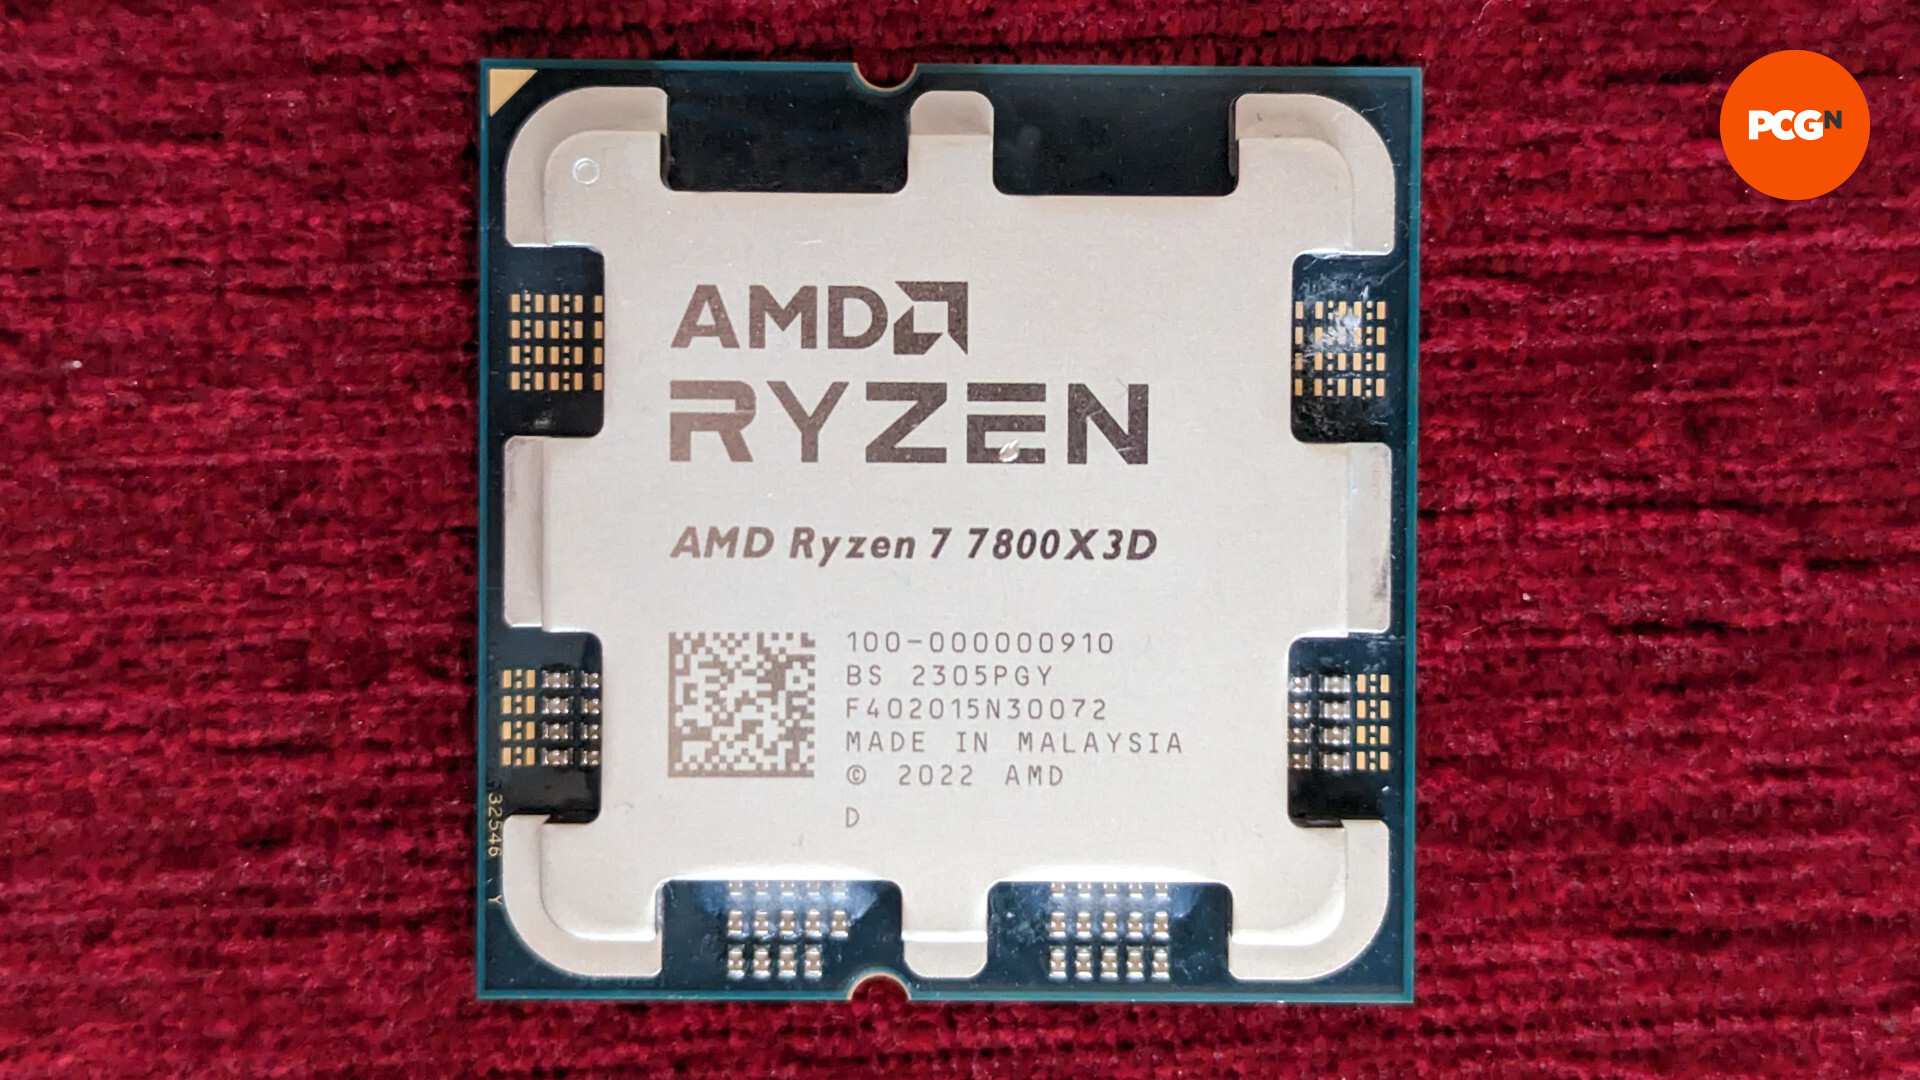 AMD Ryzen 7 7800X3D review: CPU rests on a red surface